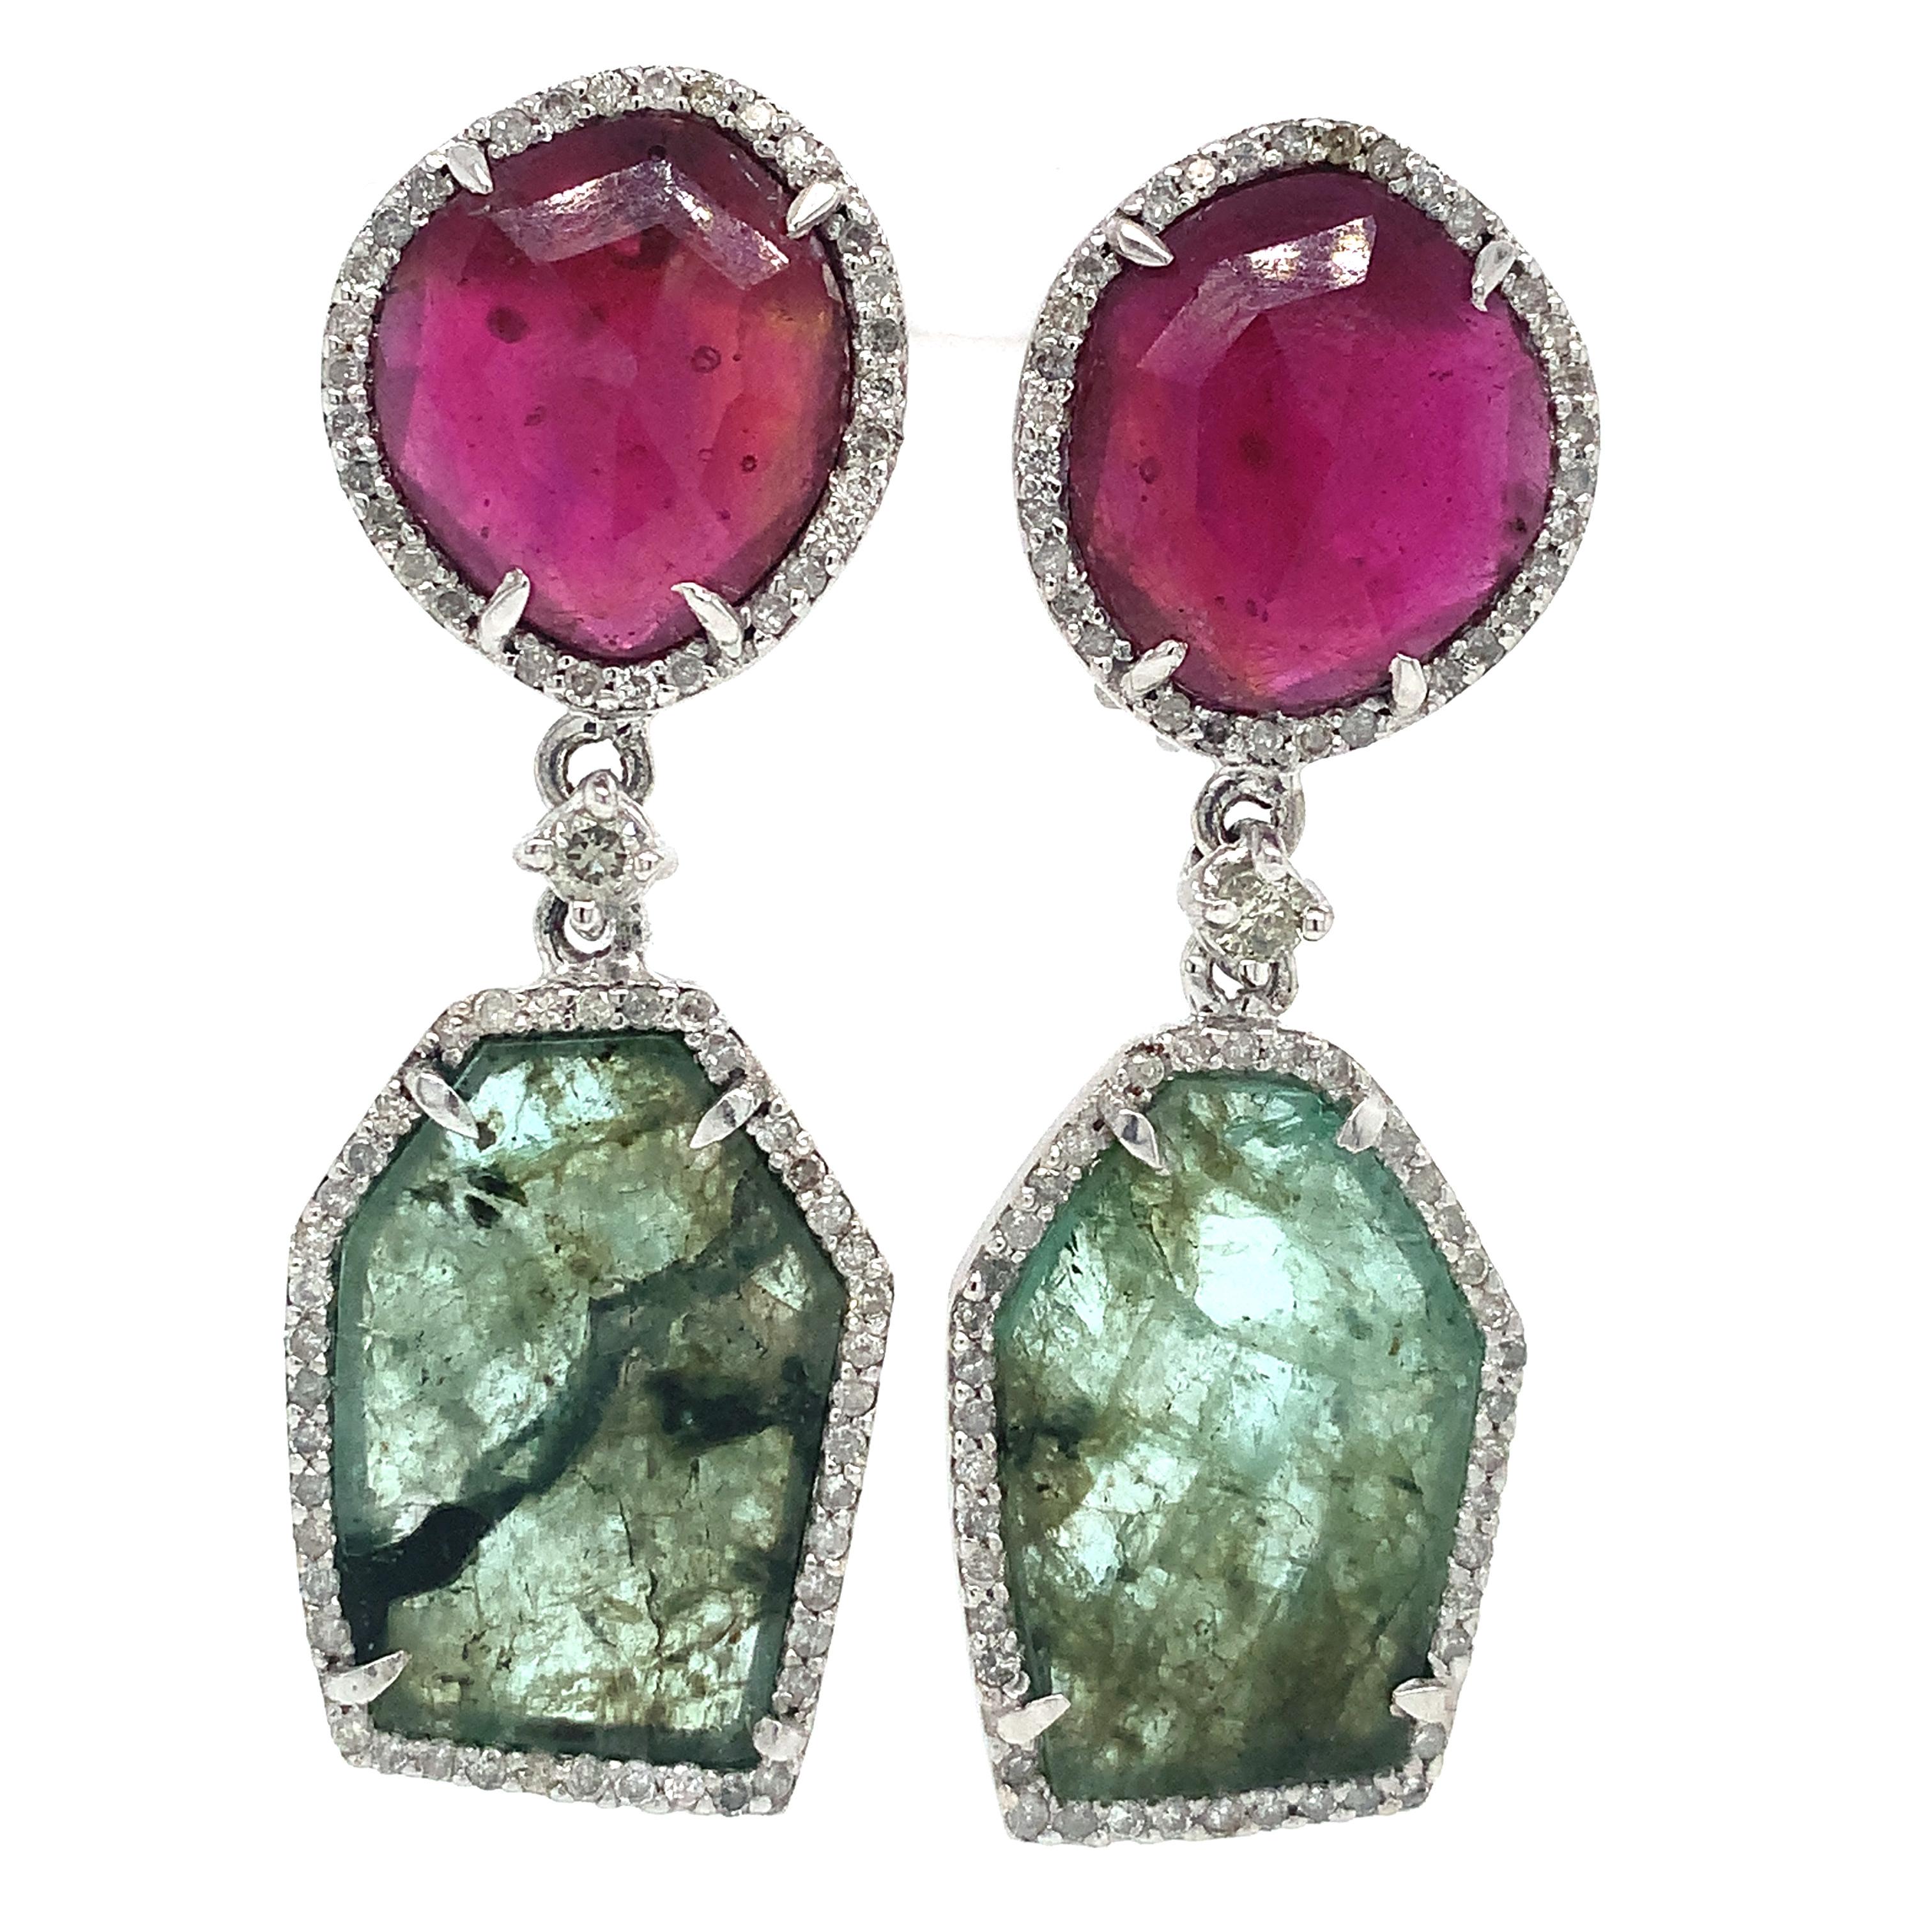 Ruby , Emerald with Diamonds all around in 18K white gold.

Ruby: 13.83ct total weight.
Emerald:9.73ct total weight.
Diamond:1.18ct total weight.